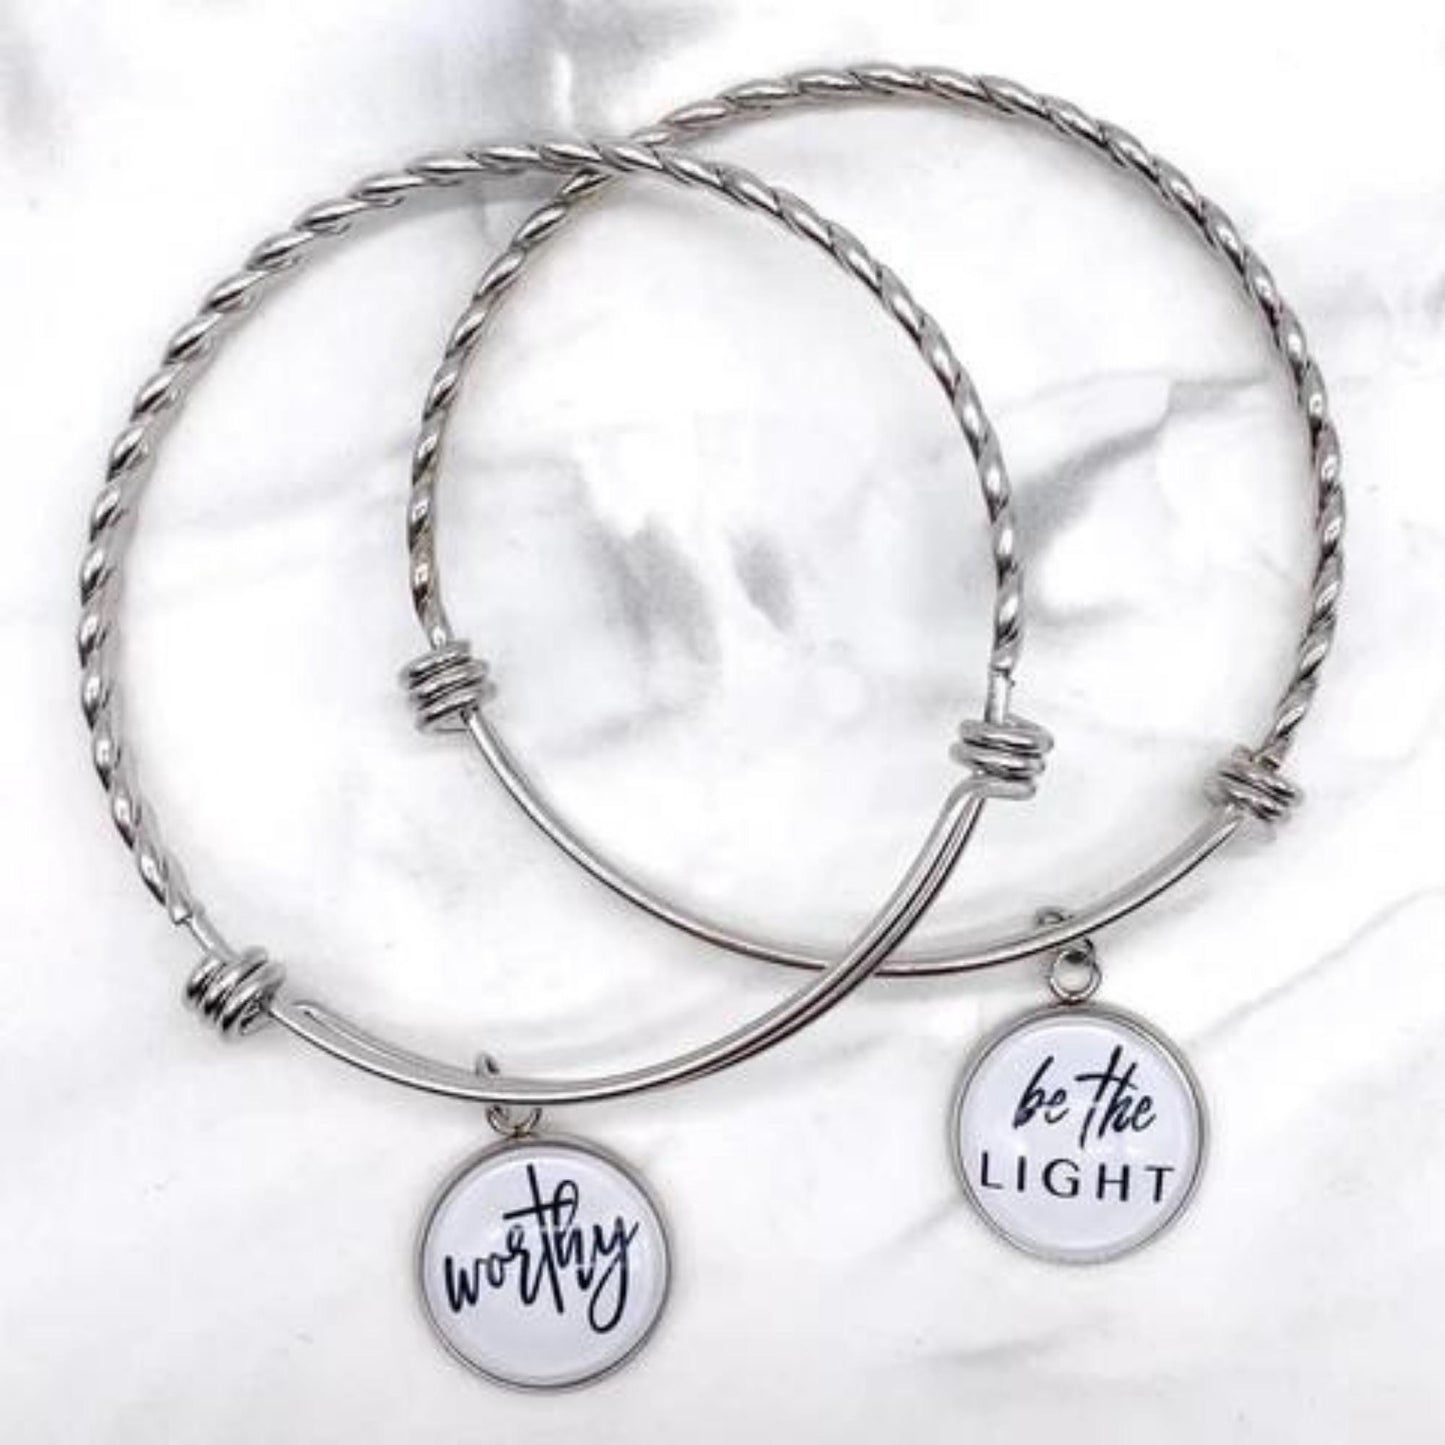 Inspirational Stainless Steel Bracelet Collection - Choose from Worthy or Be the Light | oak7west.com